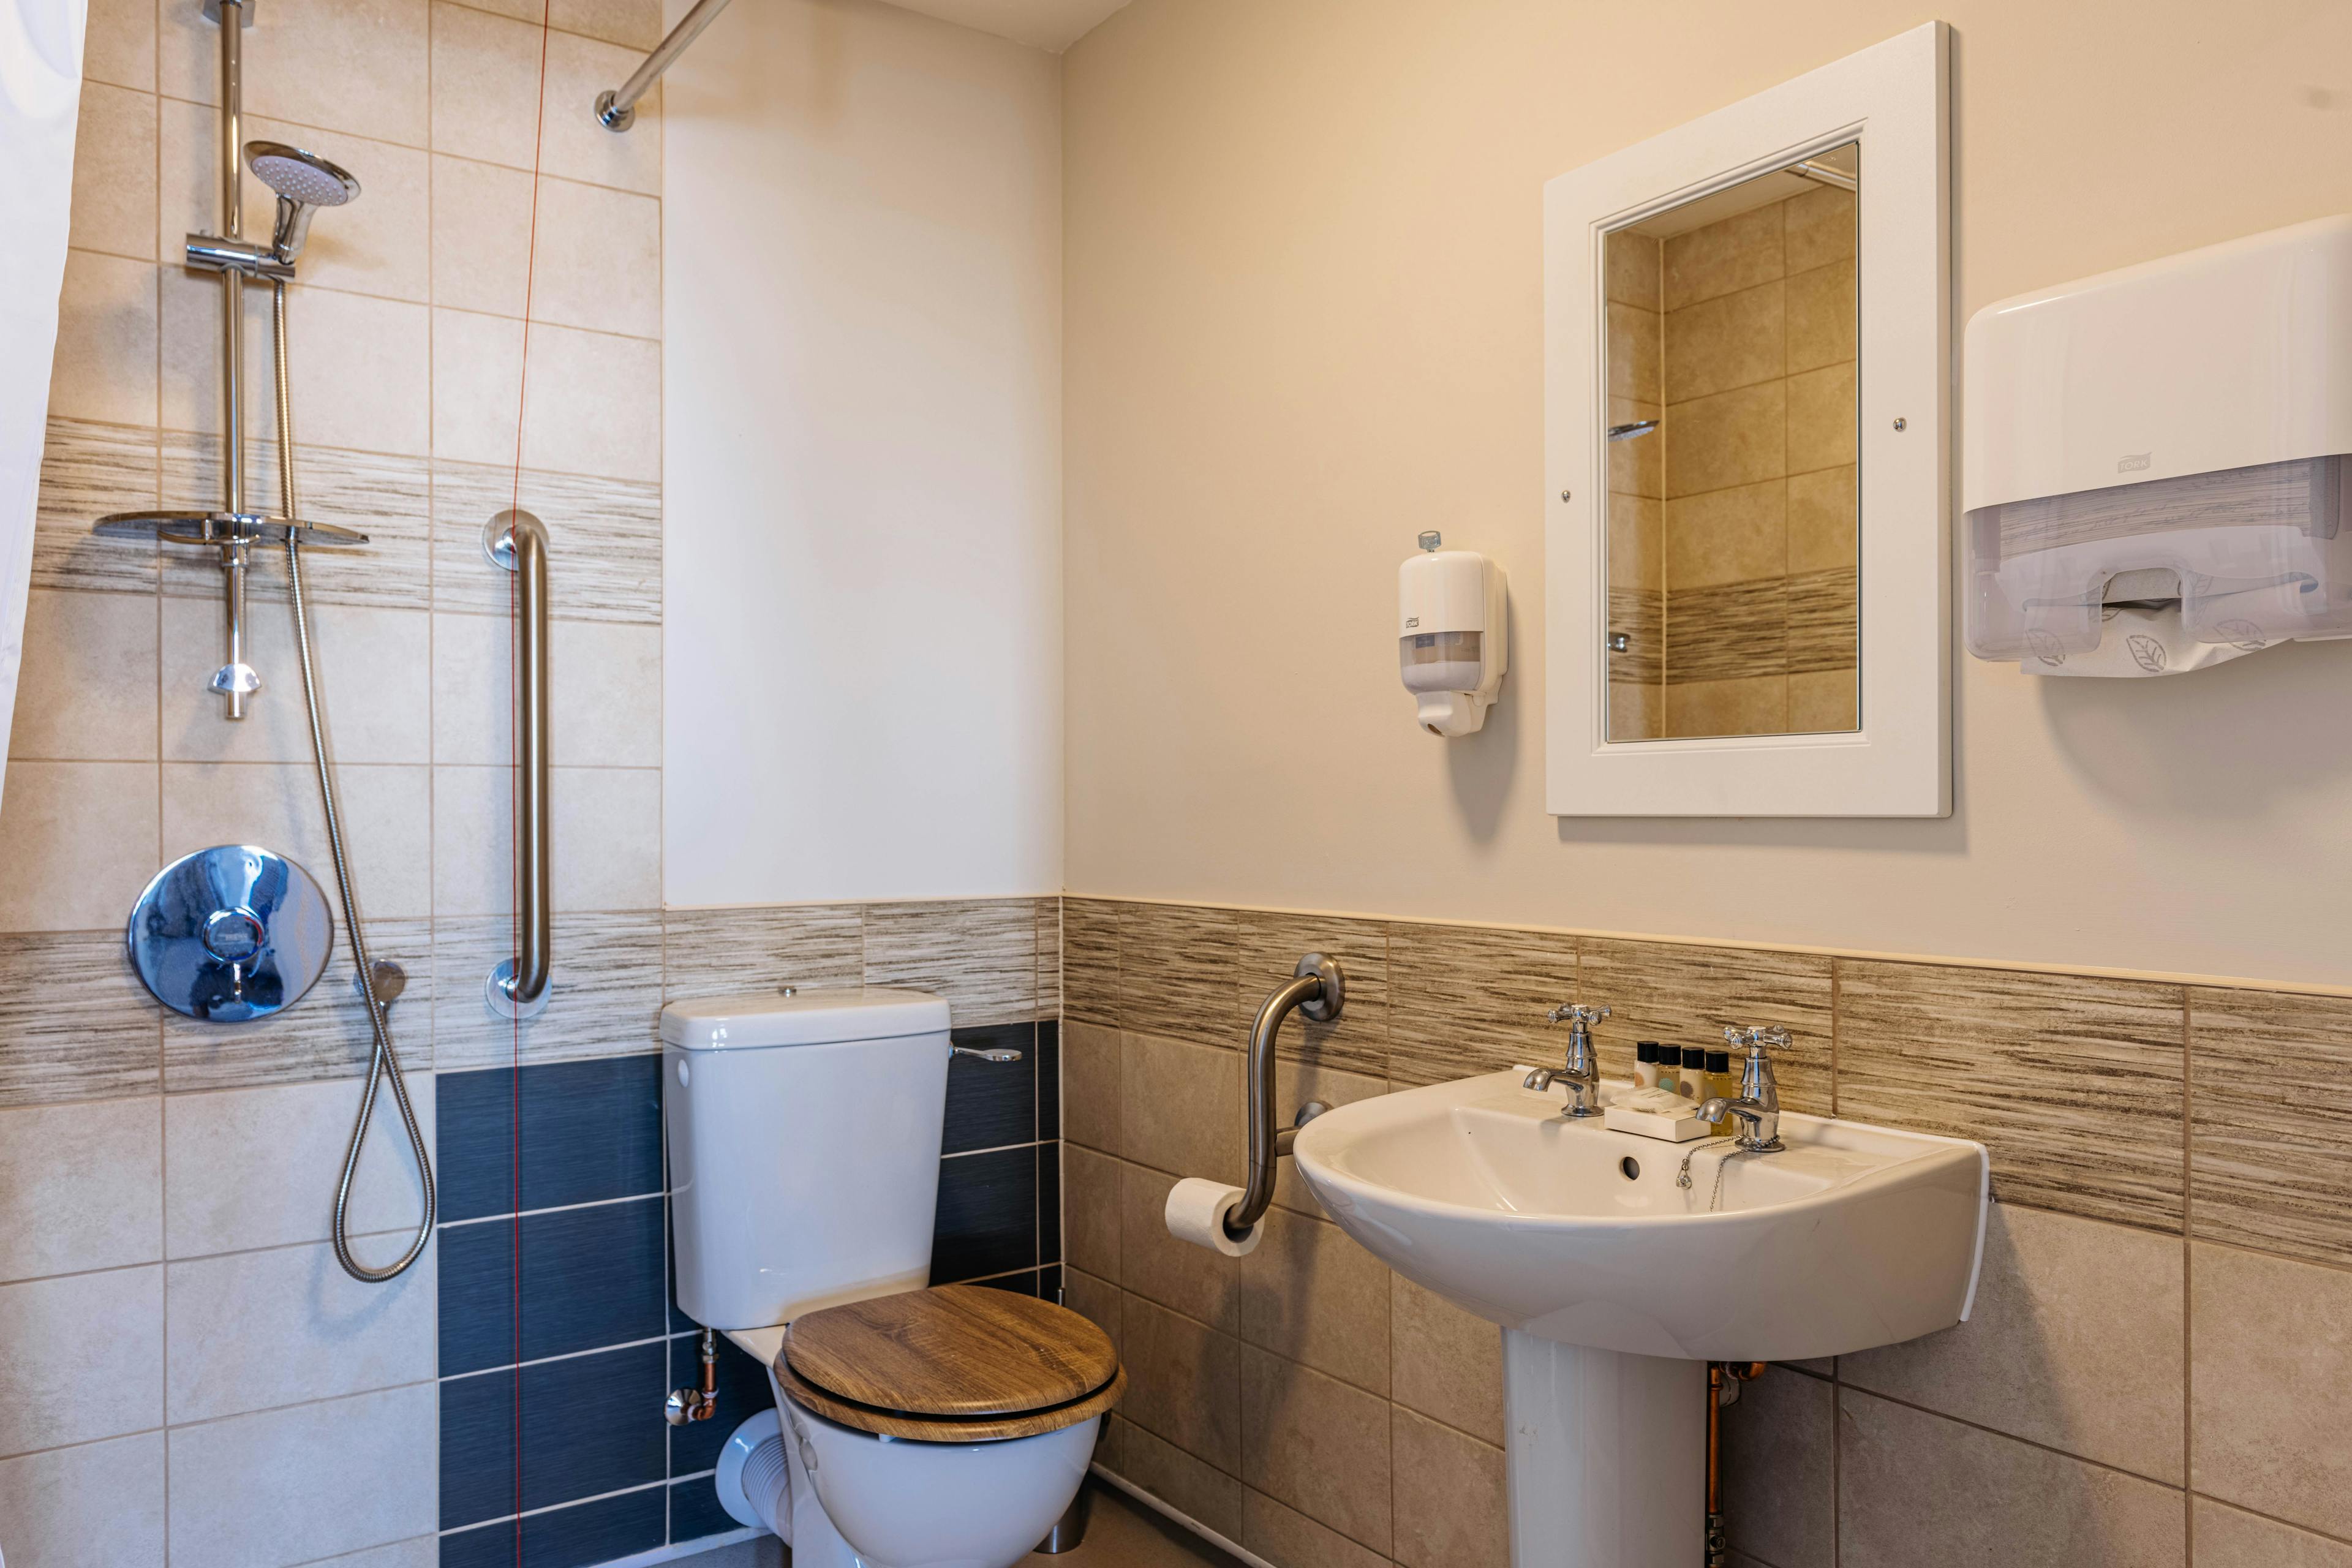 Bathroom of Lawton Rise Care Home in Stoke-on-Trent, Staffordshire